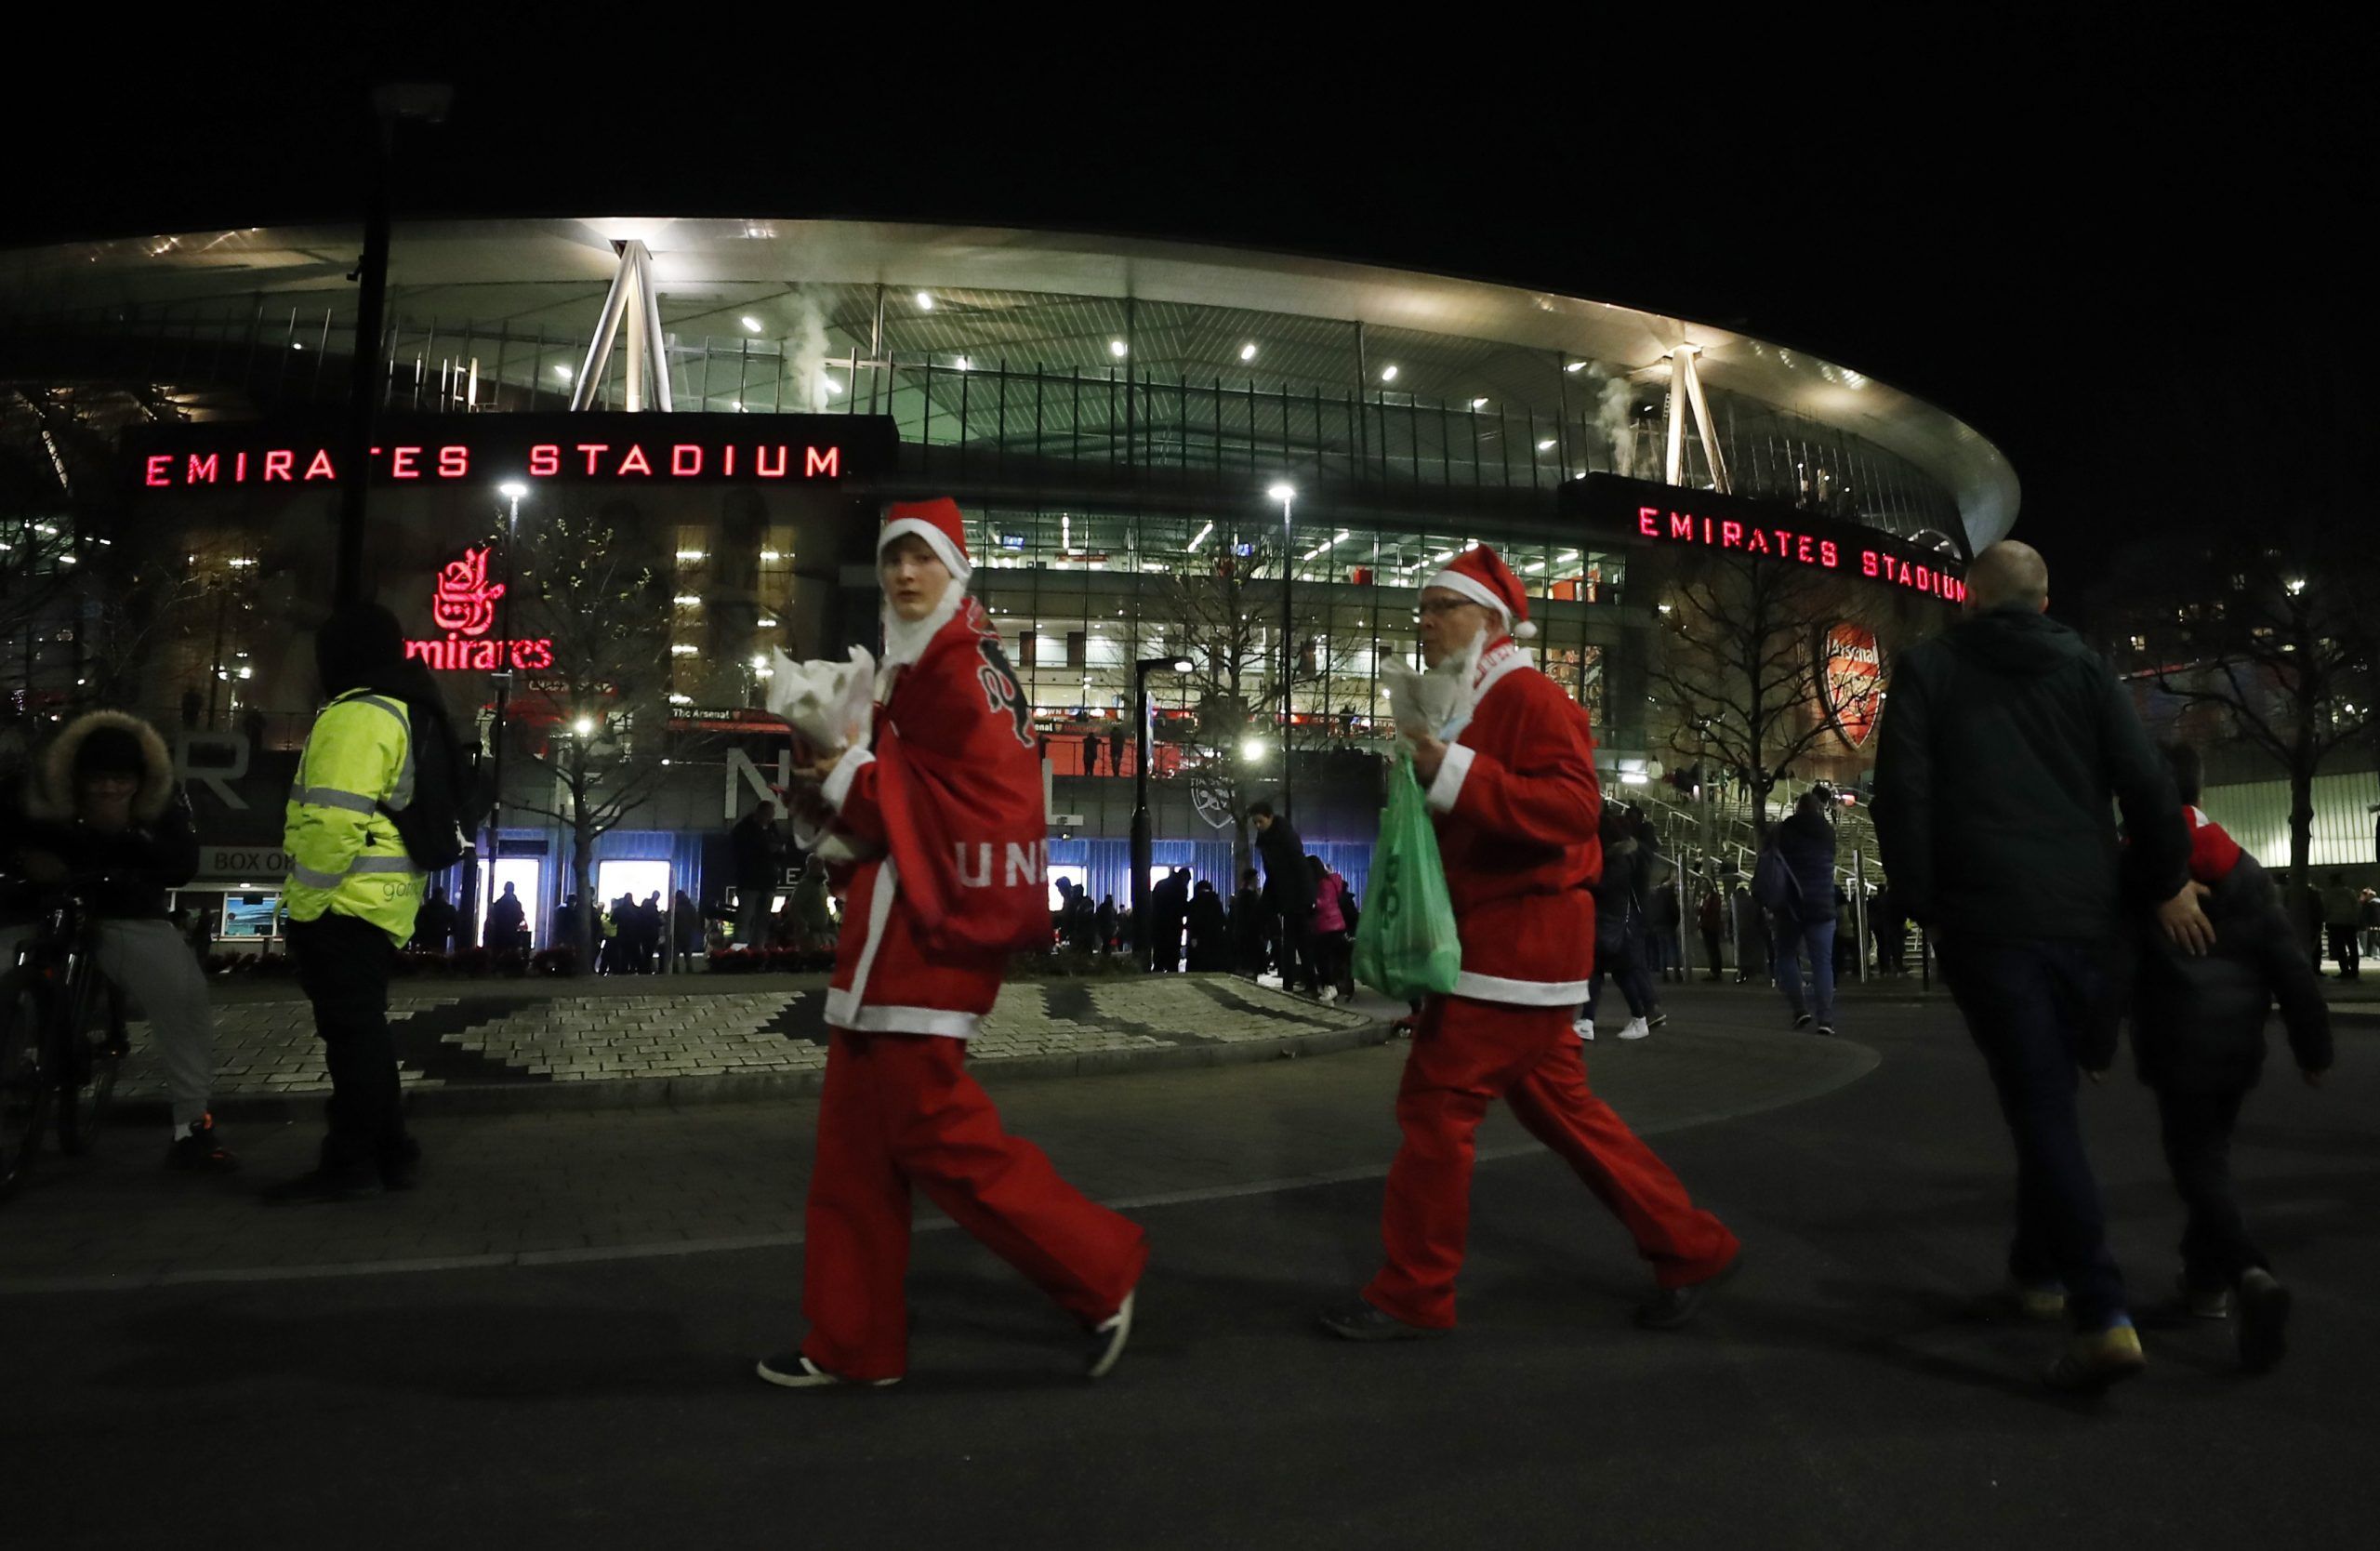 Soccer Football - Carabao Cup - Quarter Final - Arsenal v Sunderland - Emirates Stadium, London, Britain - December 21, 2021 Sunderland fans dressed as Santa outside the stadium before the match Action Images via Reuters/Lee Smith EDITORIAL USE ONLY. No use with unauthorized audio, video, data, fixture lists, club/league logos or 'live' services. Online in-match use limited to 75 images, no video emulation. No use in betting, games or single club /league/player publications.  Please contact your